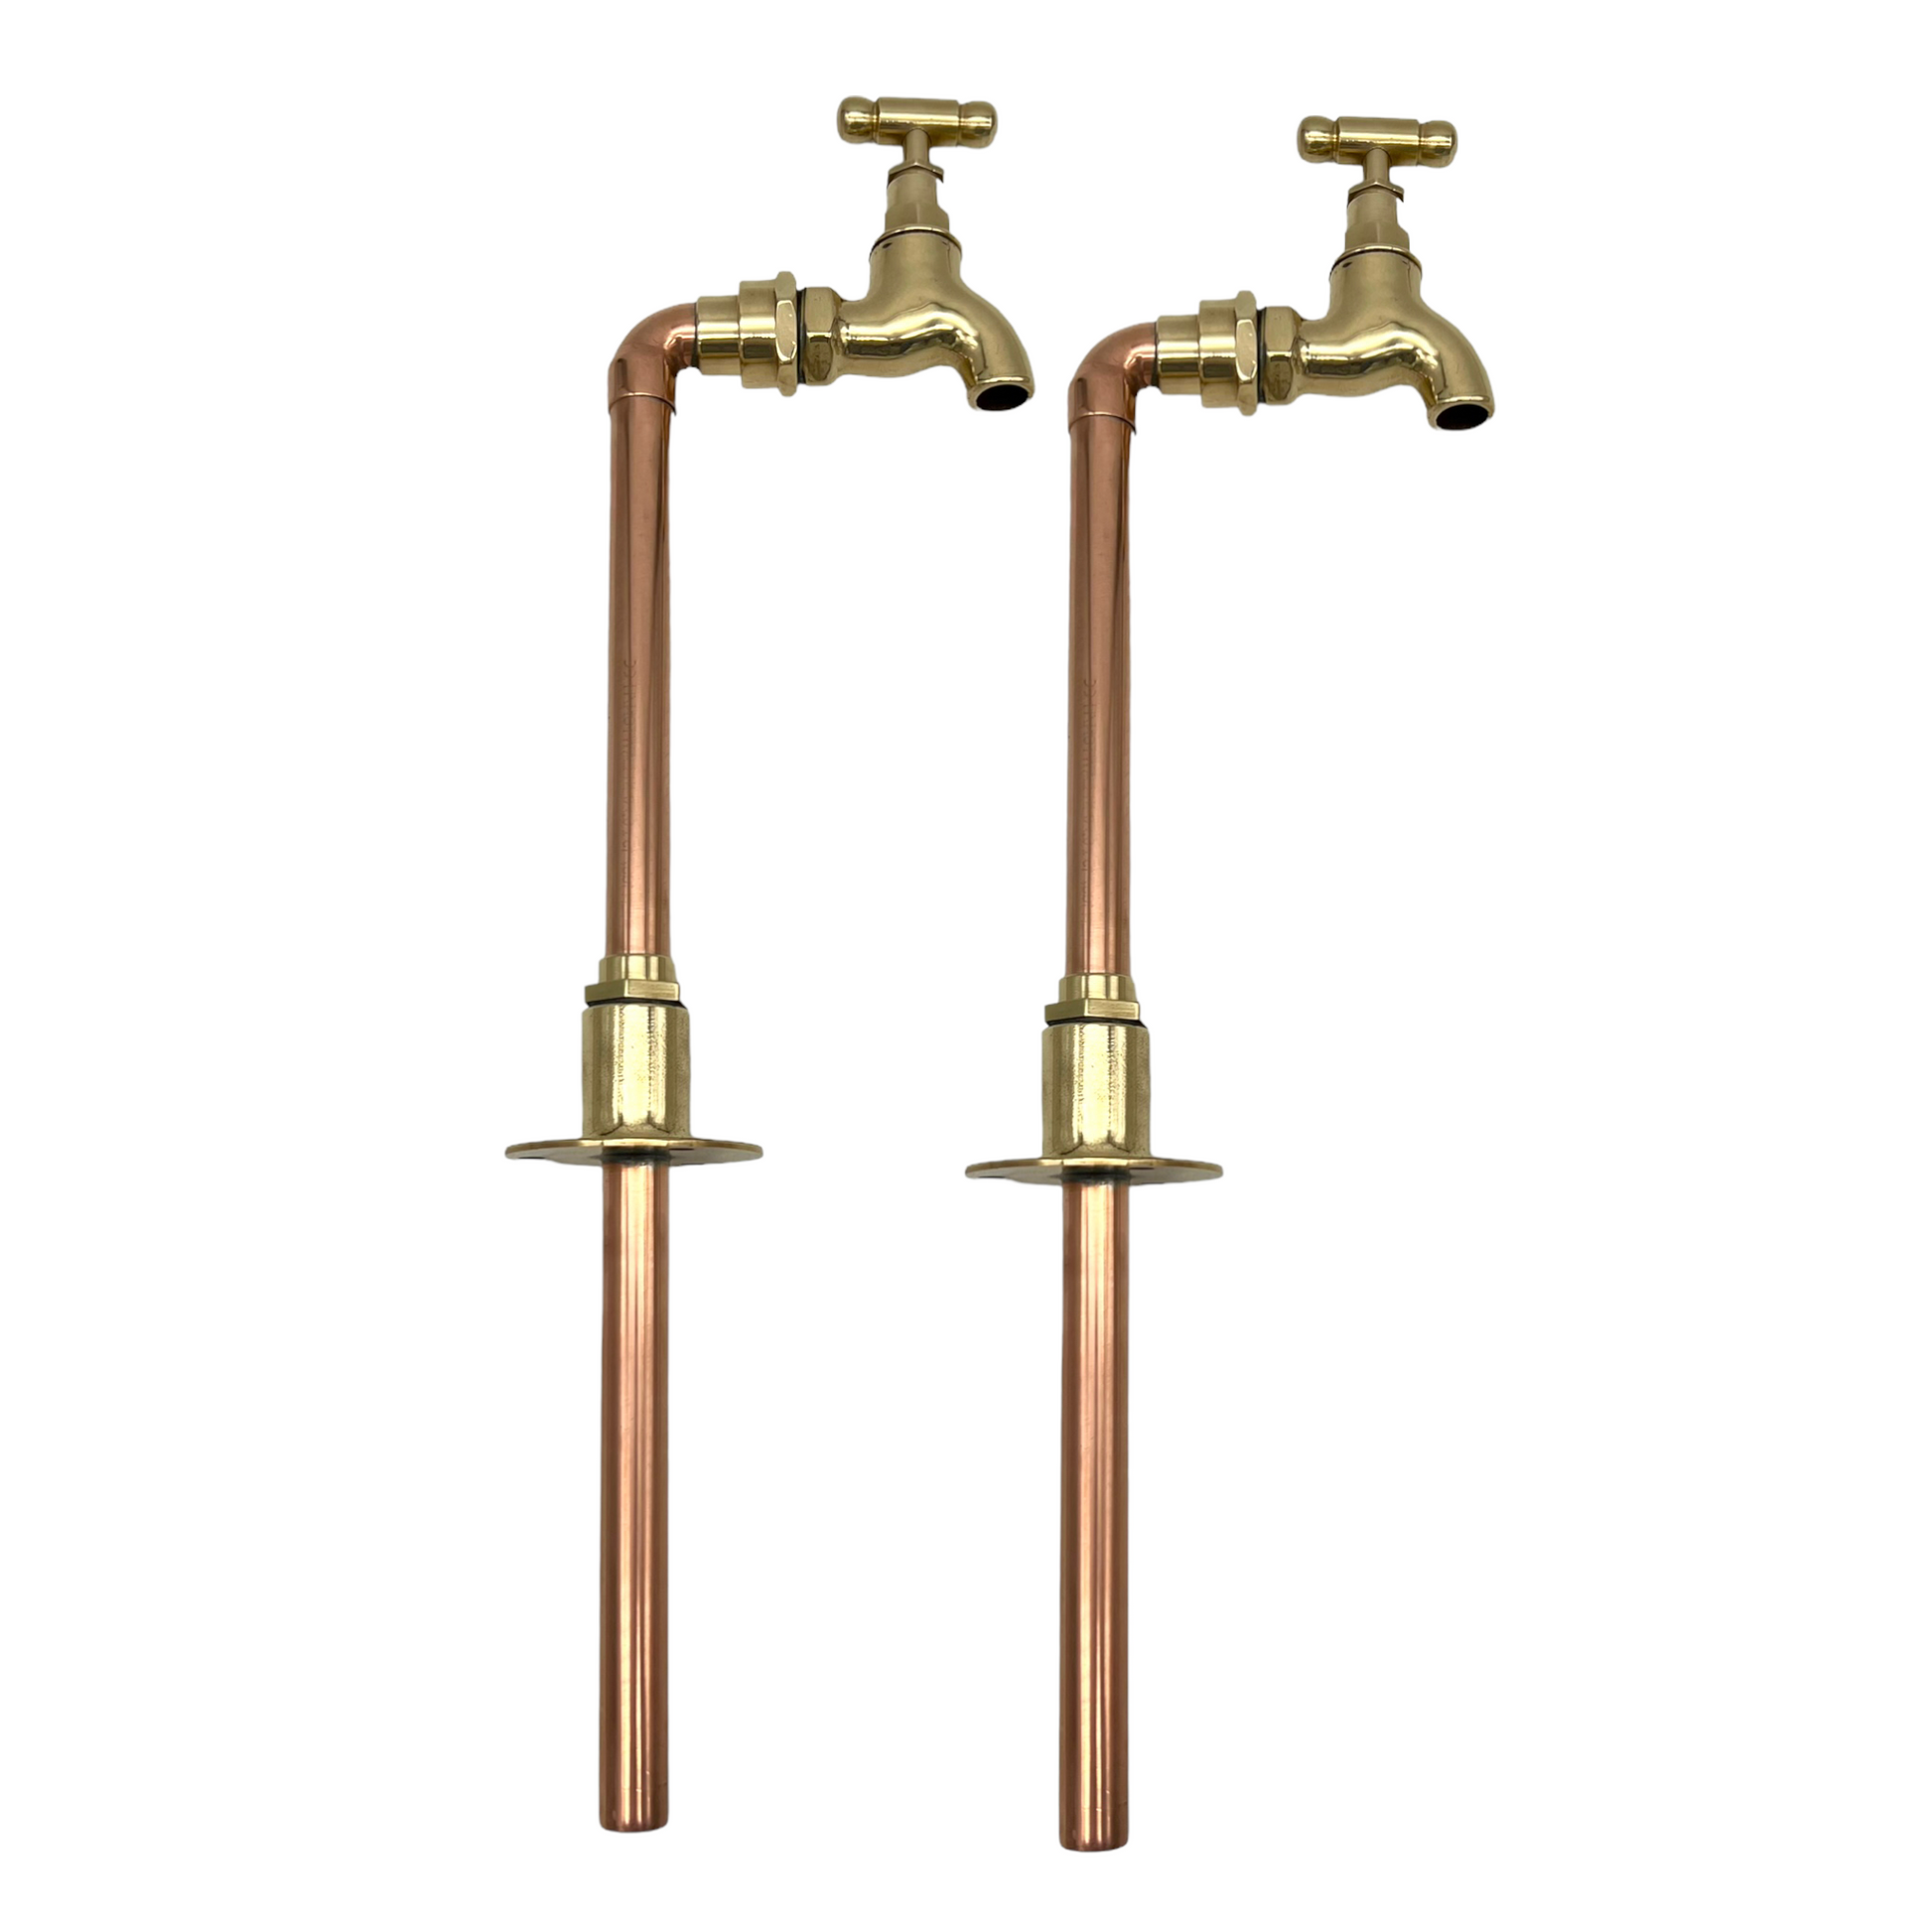 Complete copper and brass tap including tail ends sold by All Things French Store